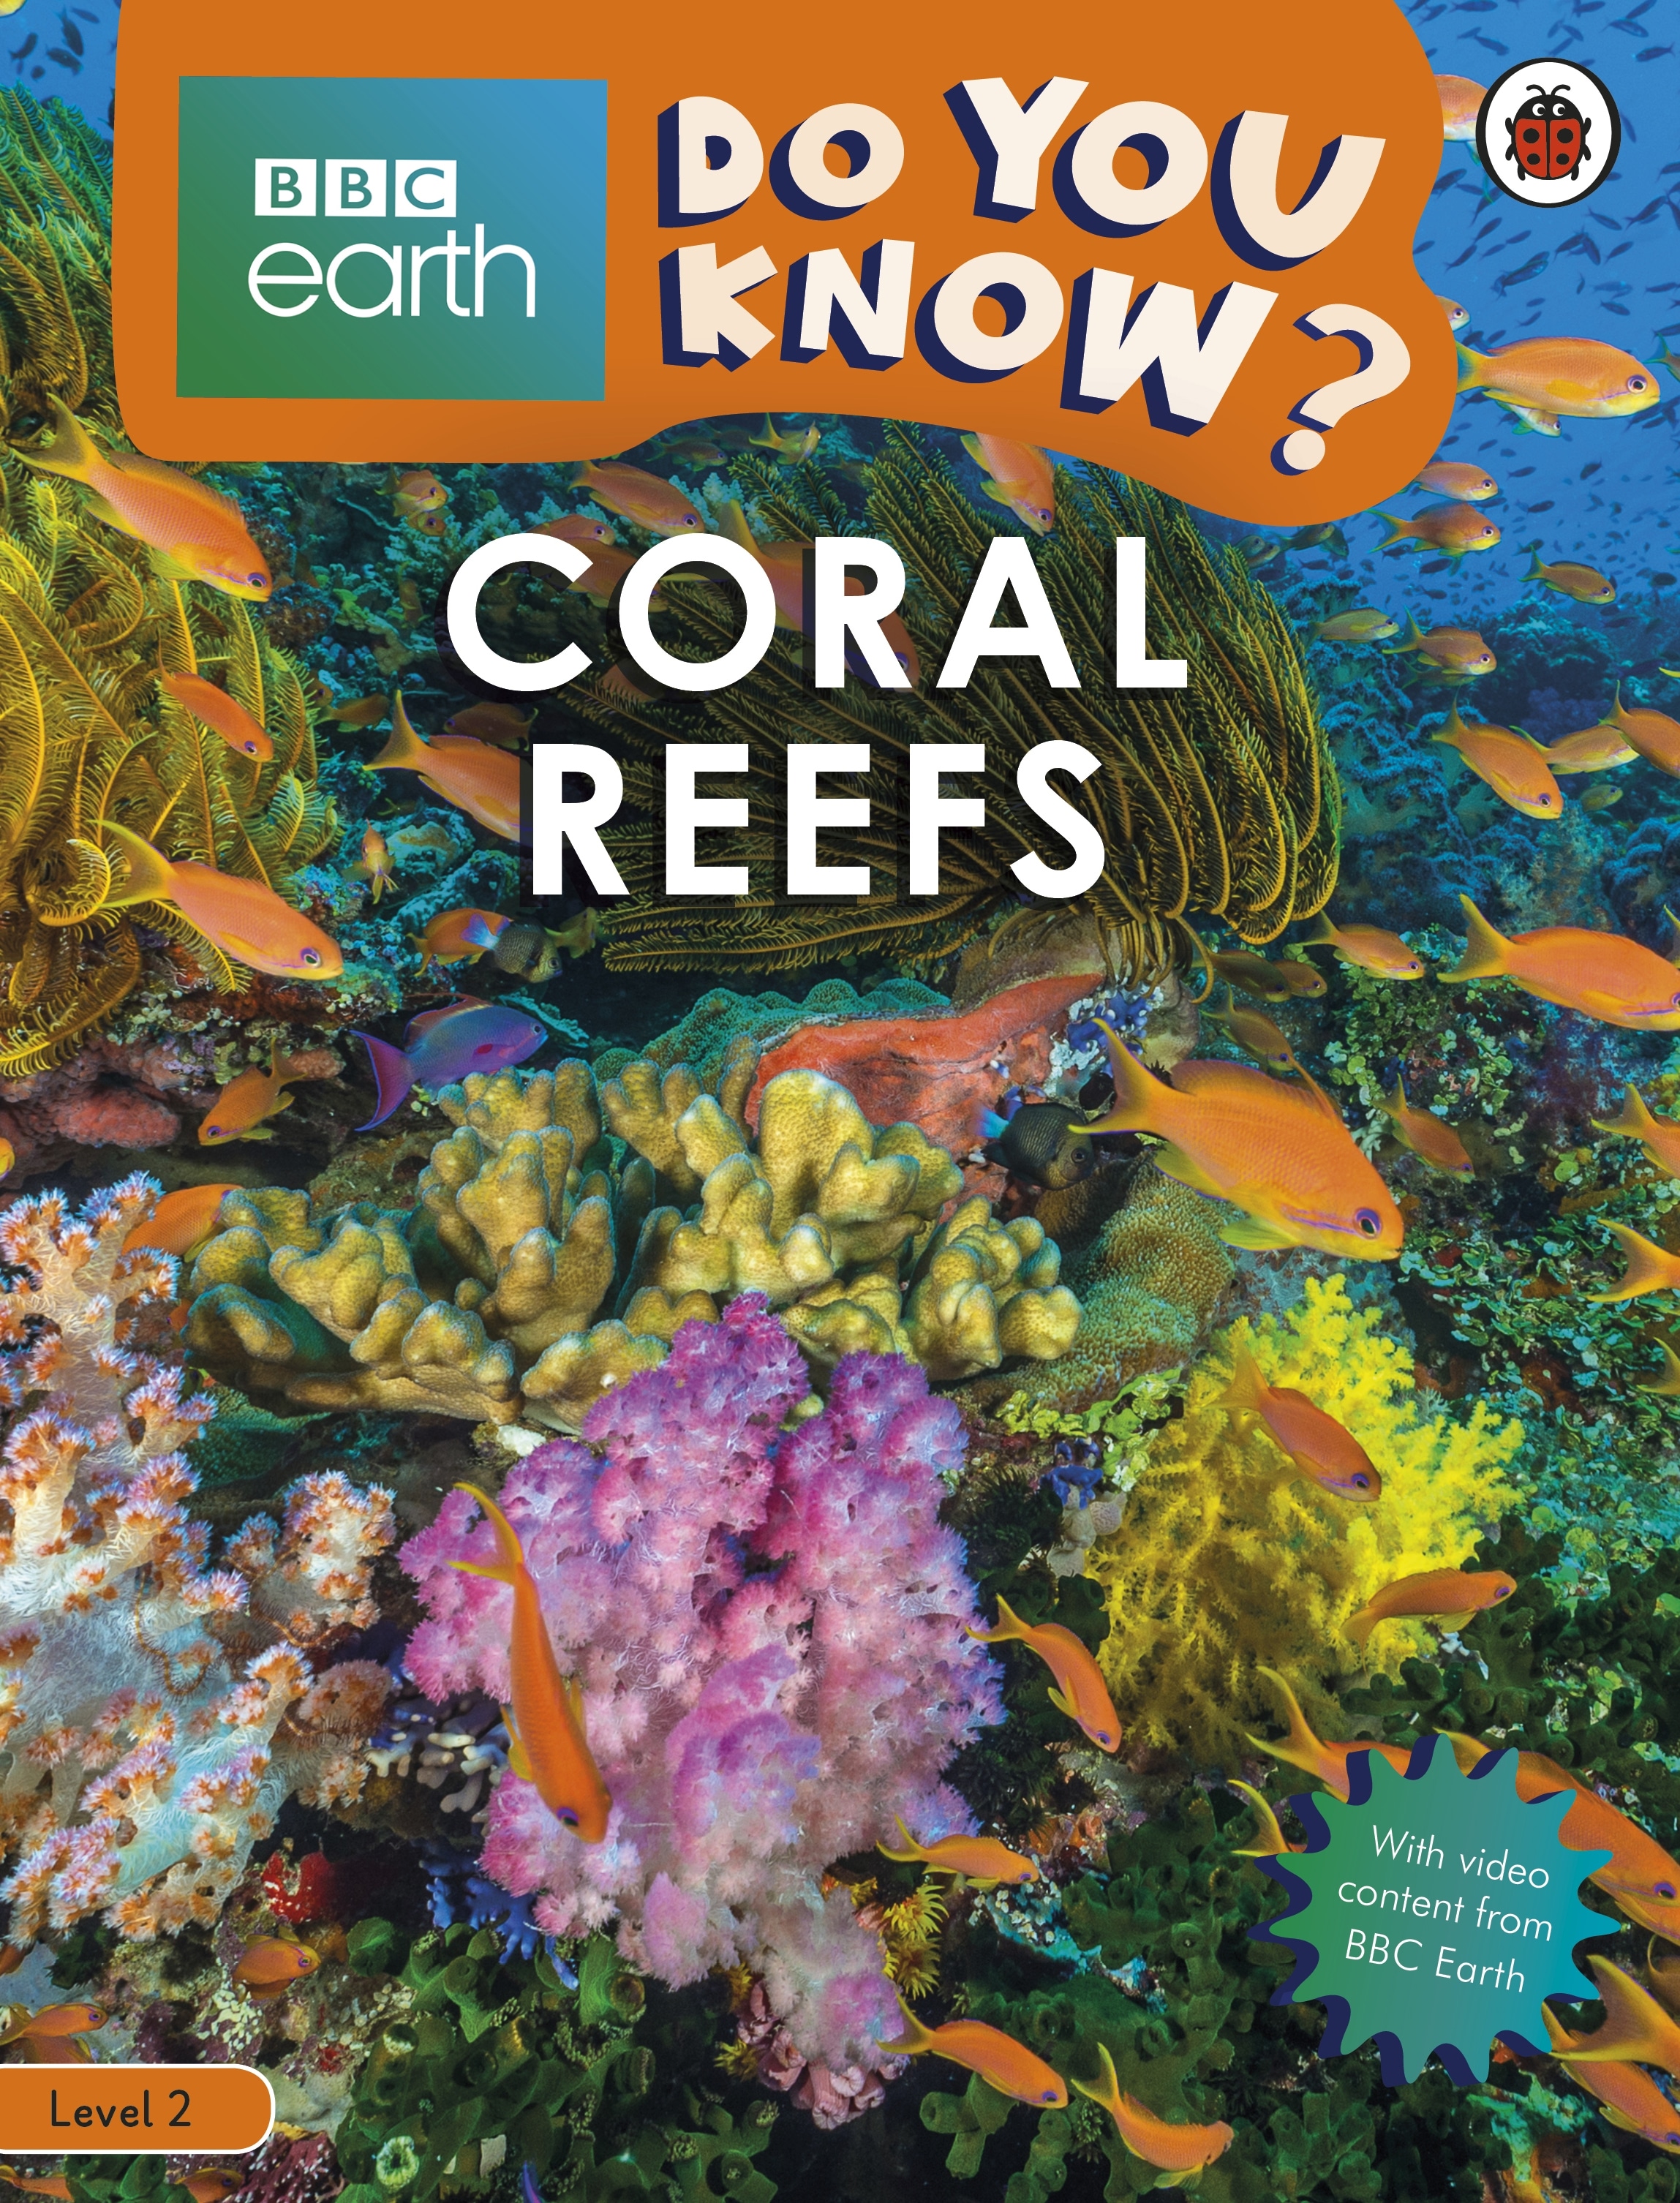 Do You Know? Level 2 – BBC Earth Coral Reefs